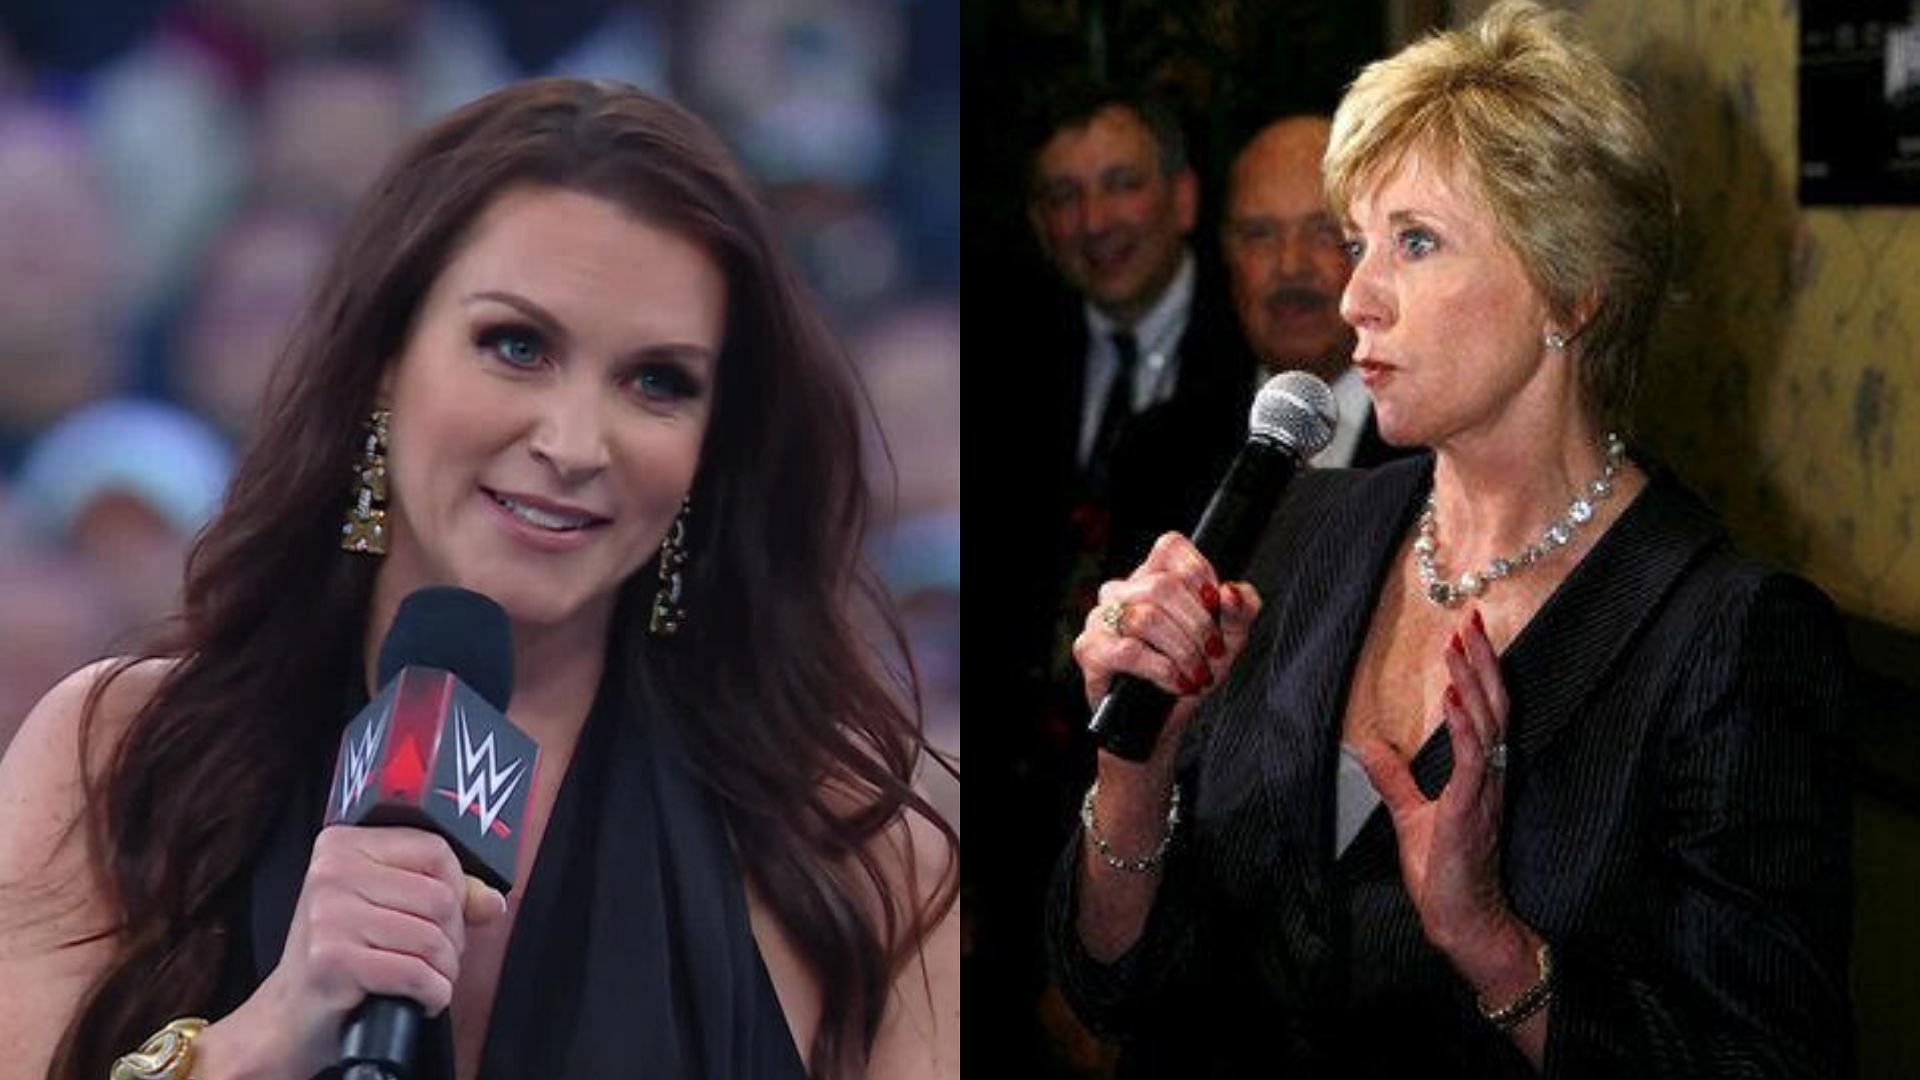 Stephanie McMahon (left) was at WrestleMania 40 with Linda McMahon (right)